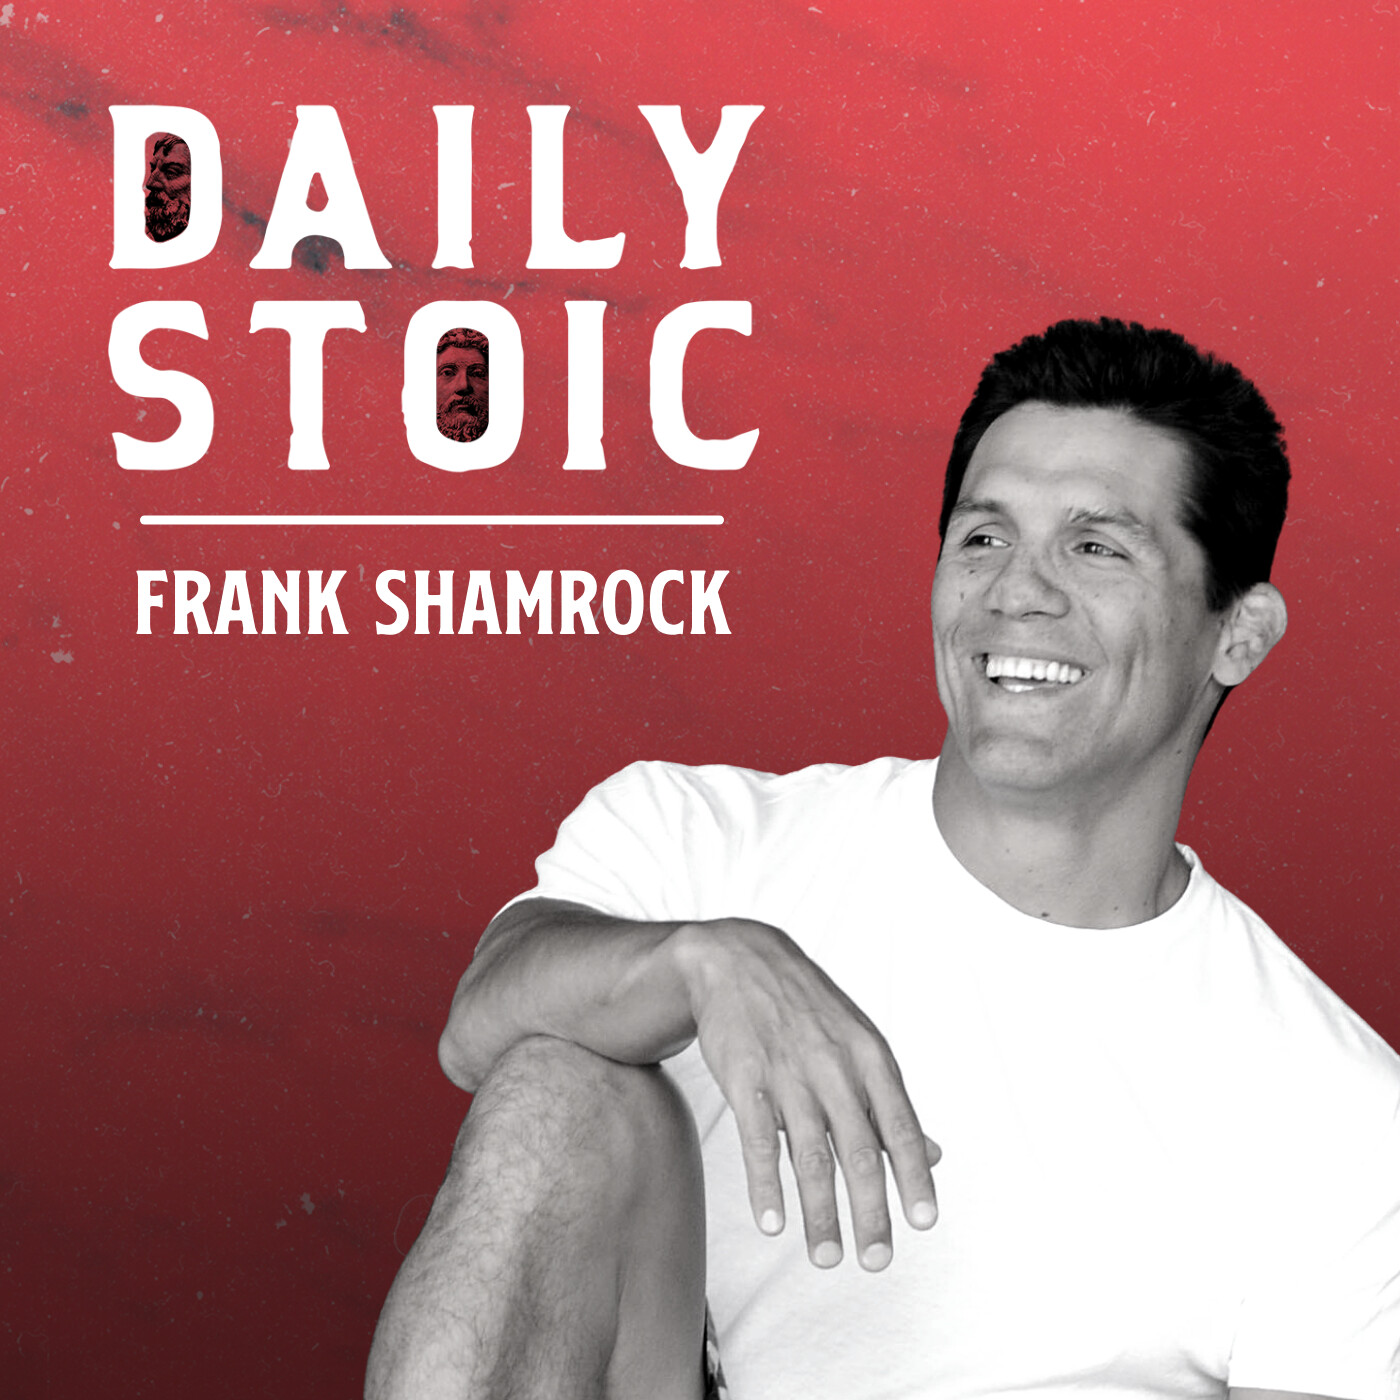 MMA Legend Frank Shamrock On Conquering The Ego and Developing Honor